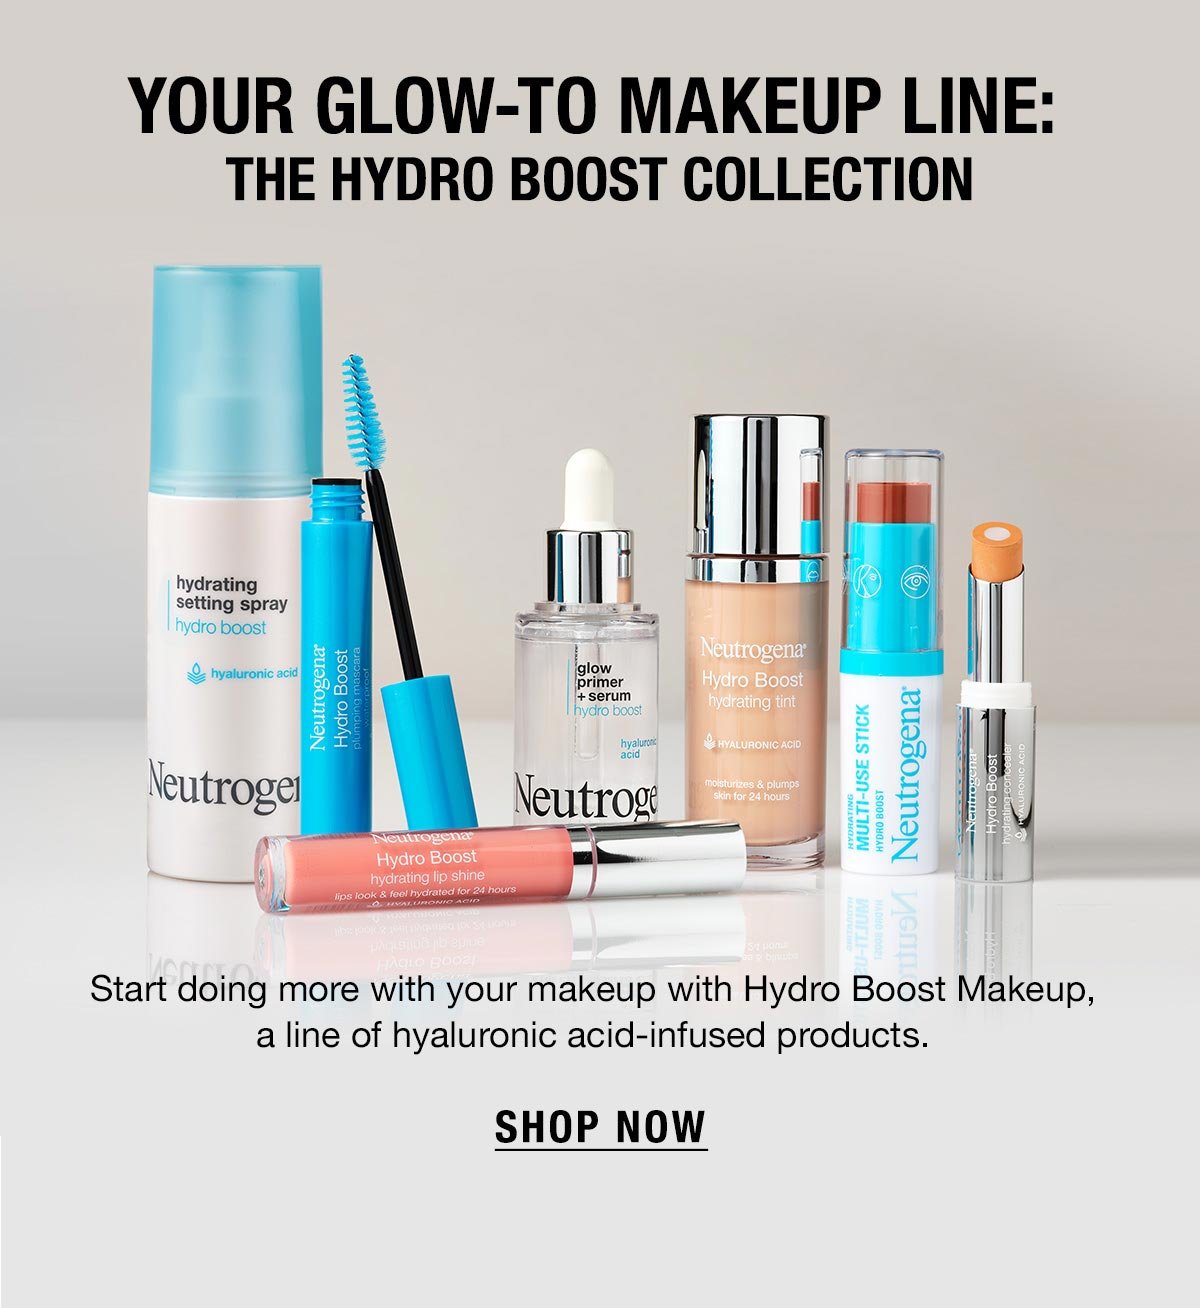 Your Glow-to-makeup line: The Hydro boost collection